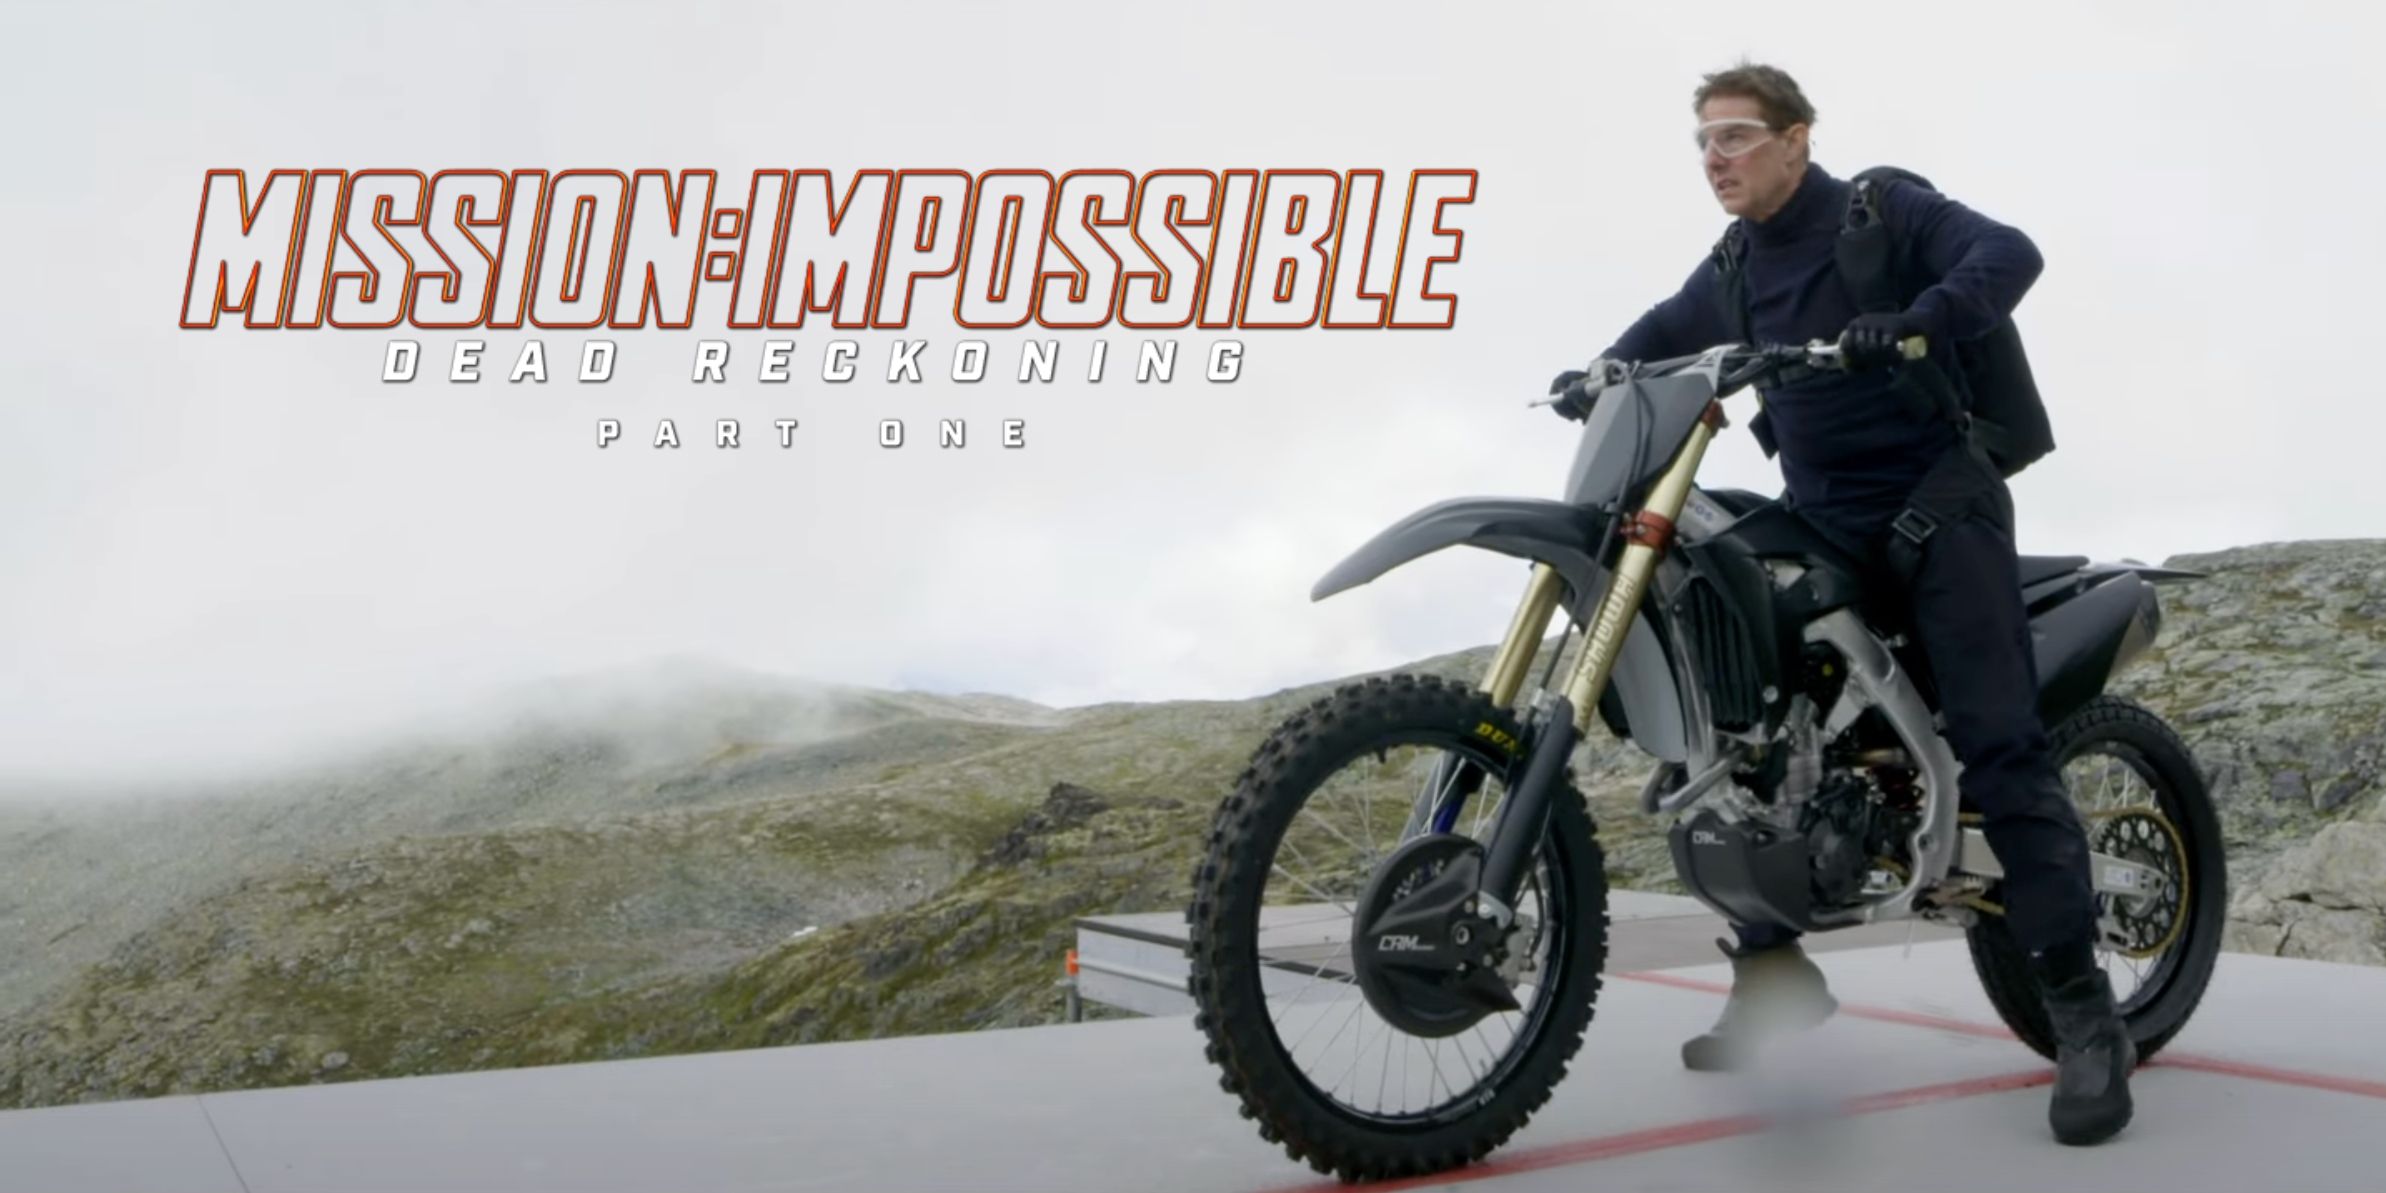 tom cruise stunts in mission impossible 7